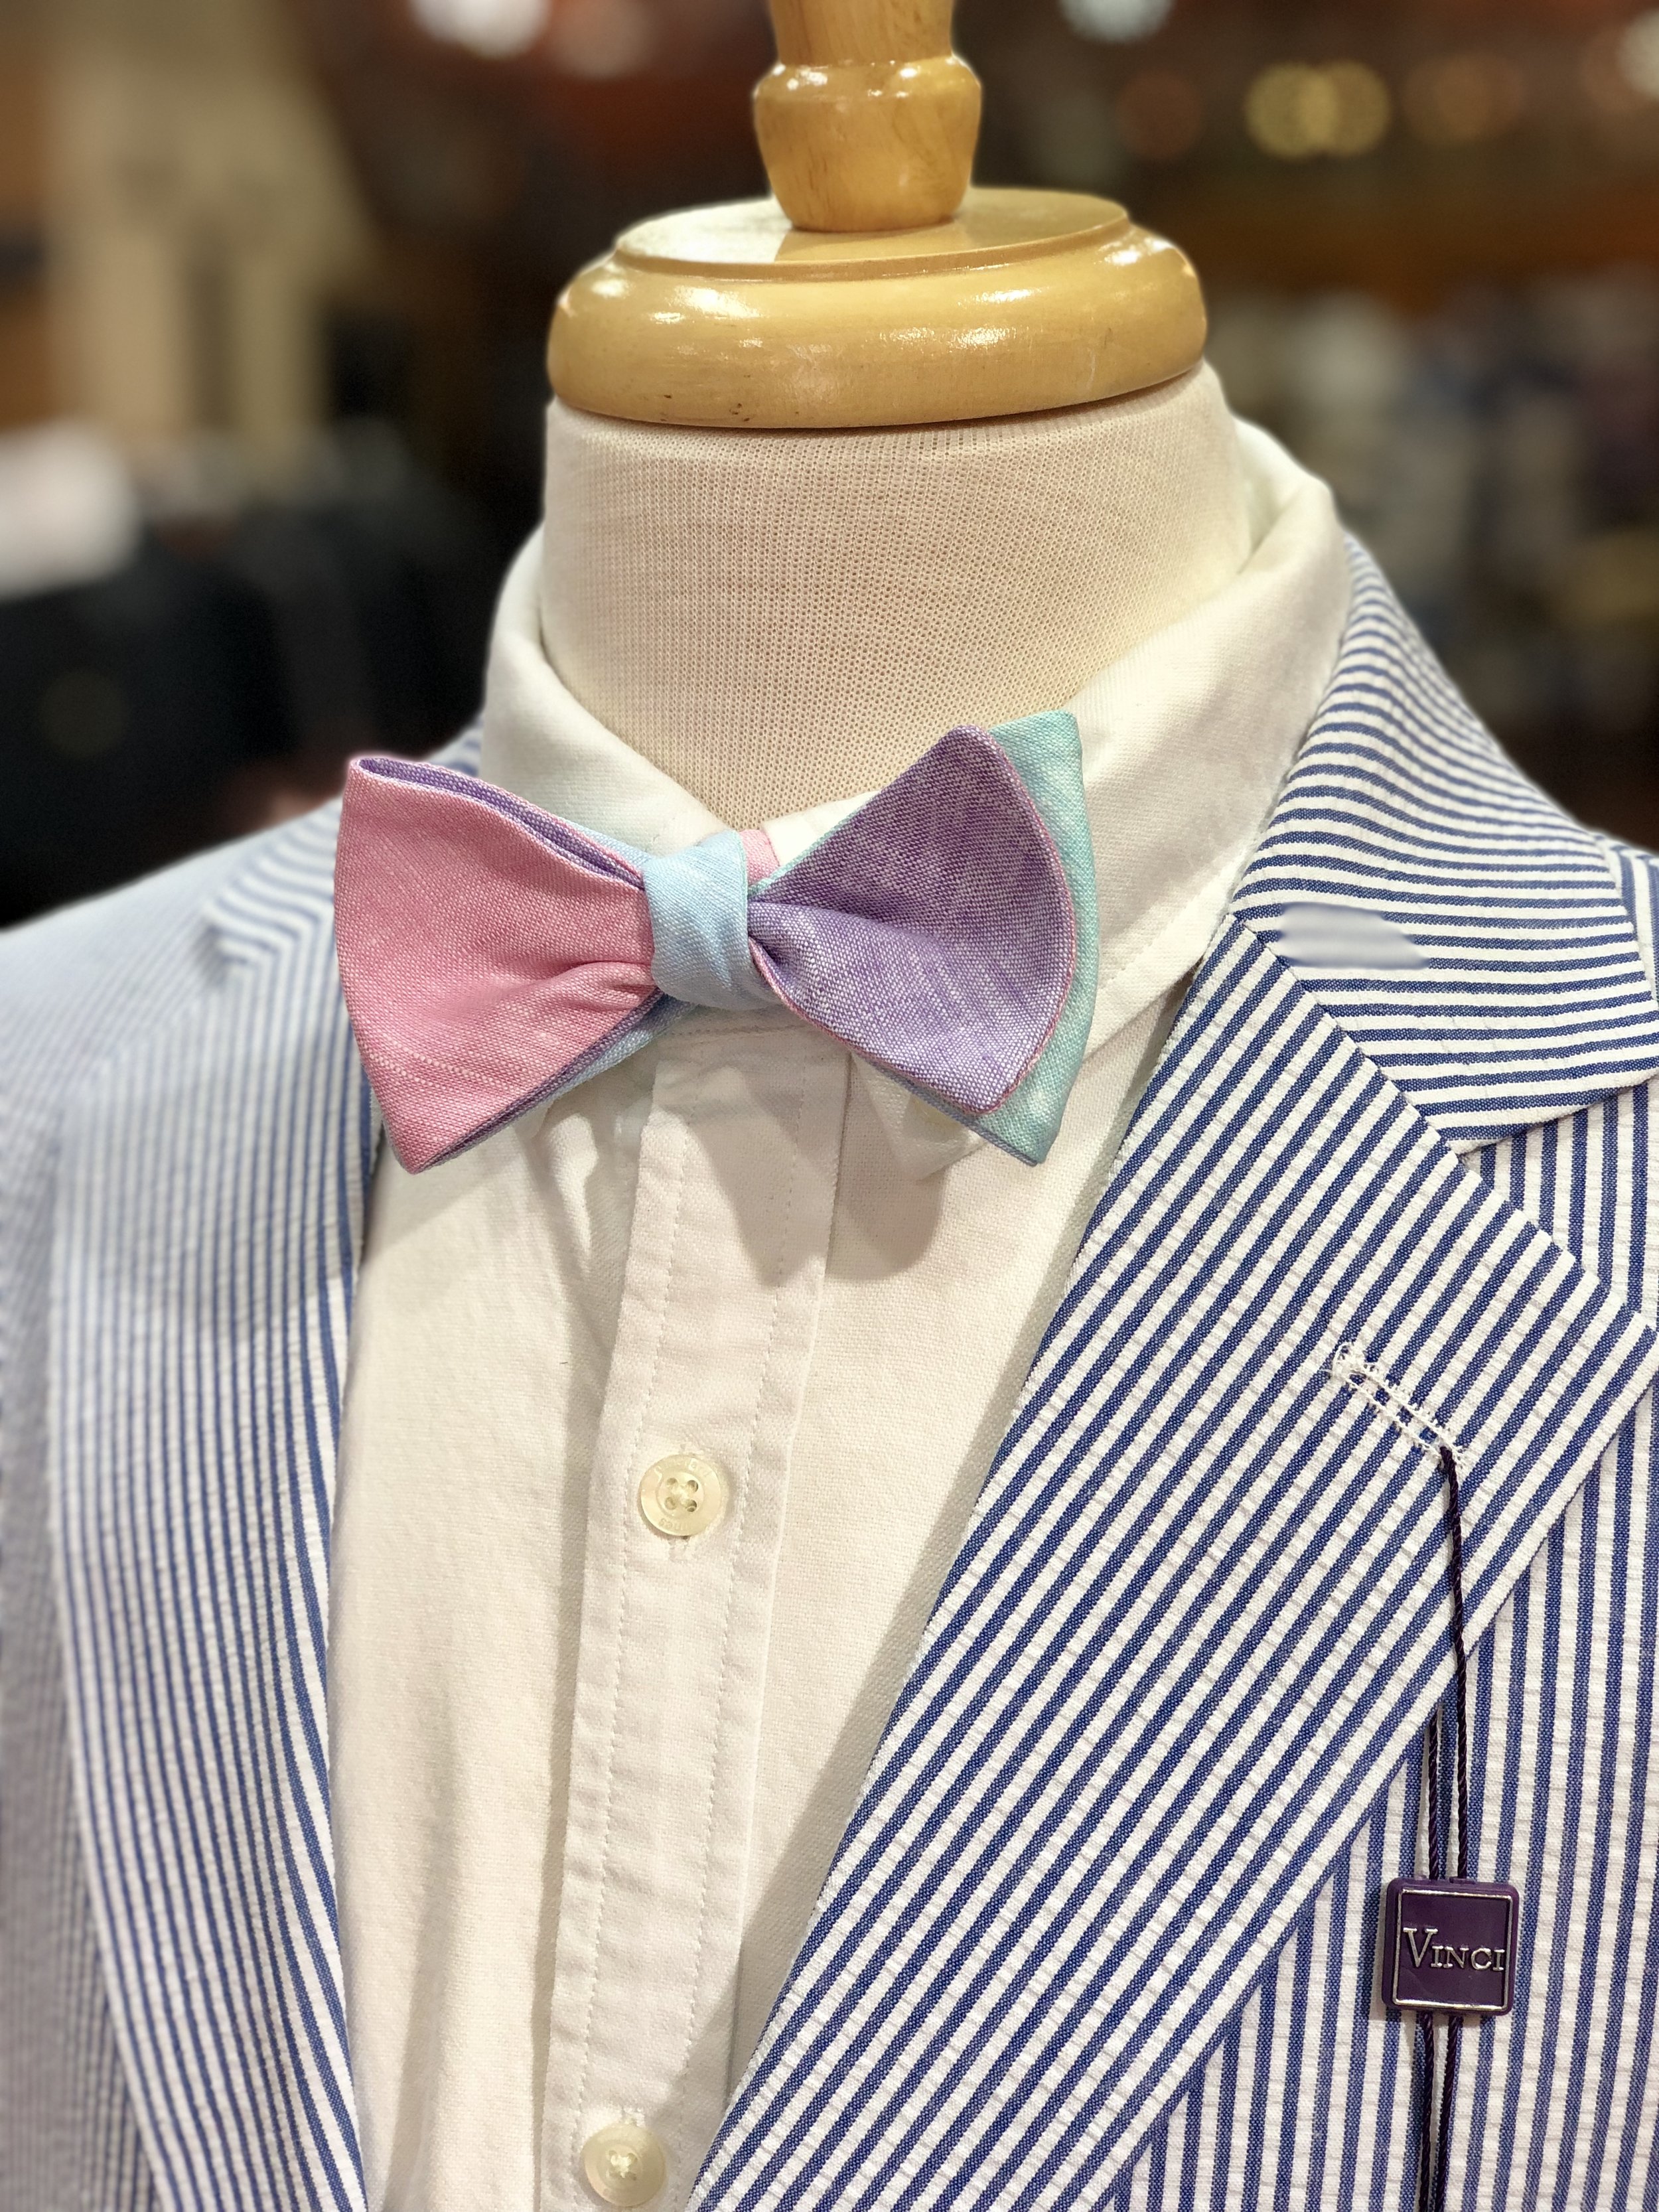 Bow Ties for Boys - A Guide  R. Hanauer Bow Ties & Accessories